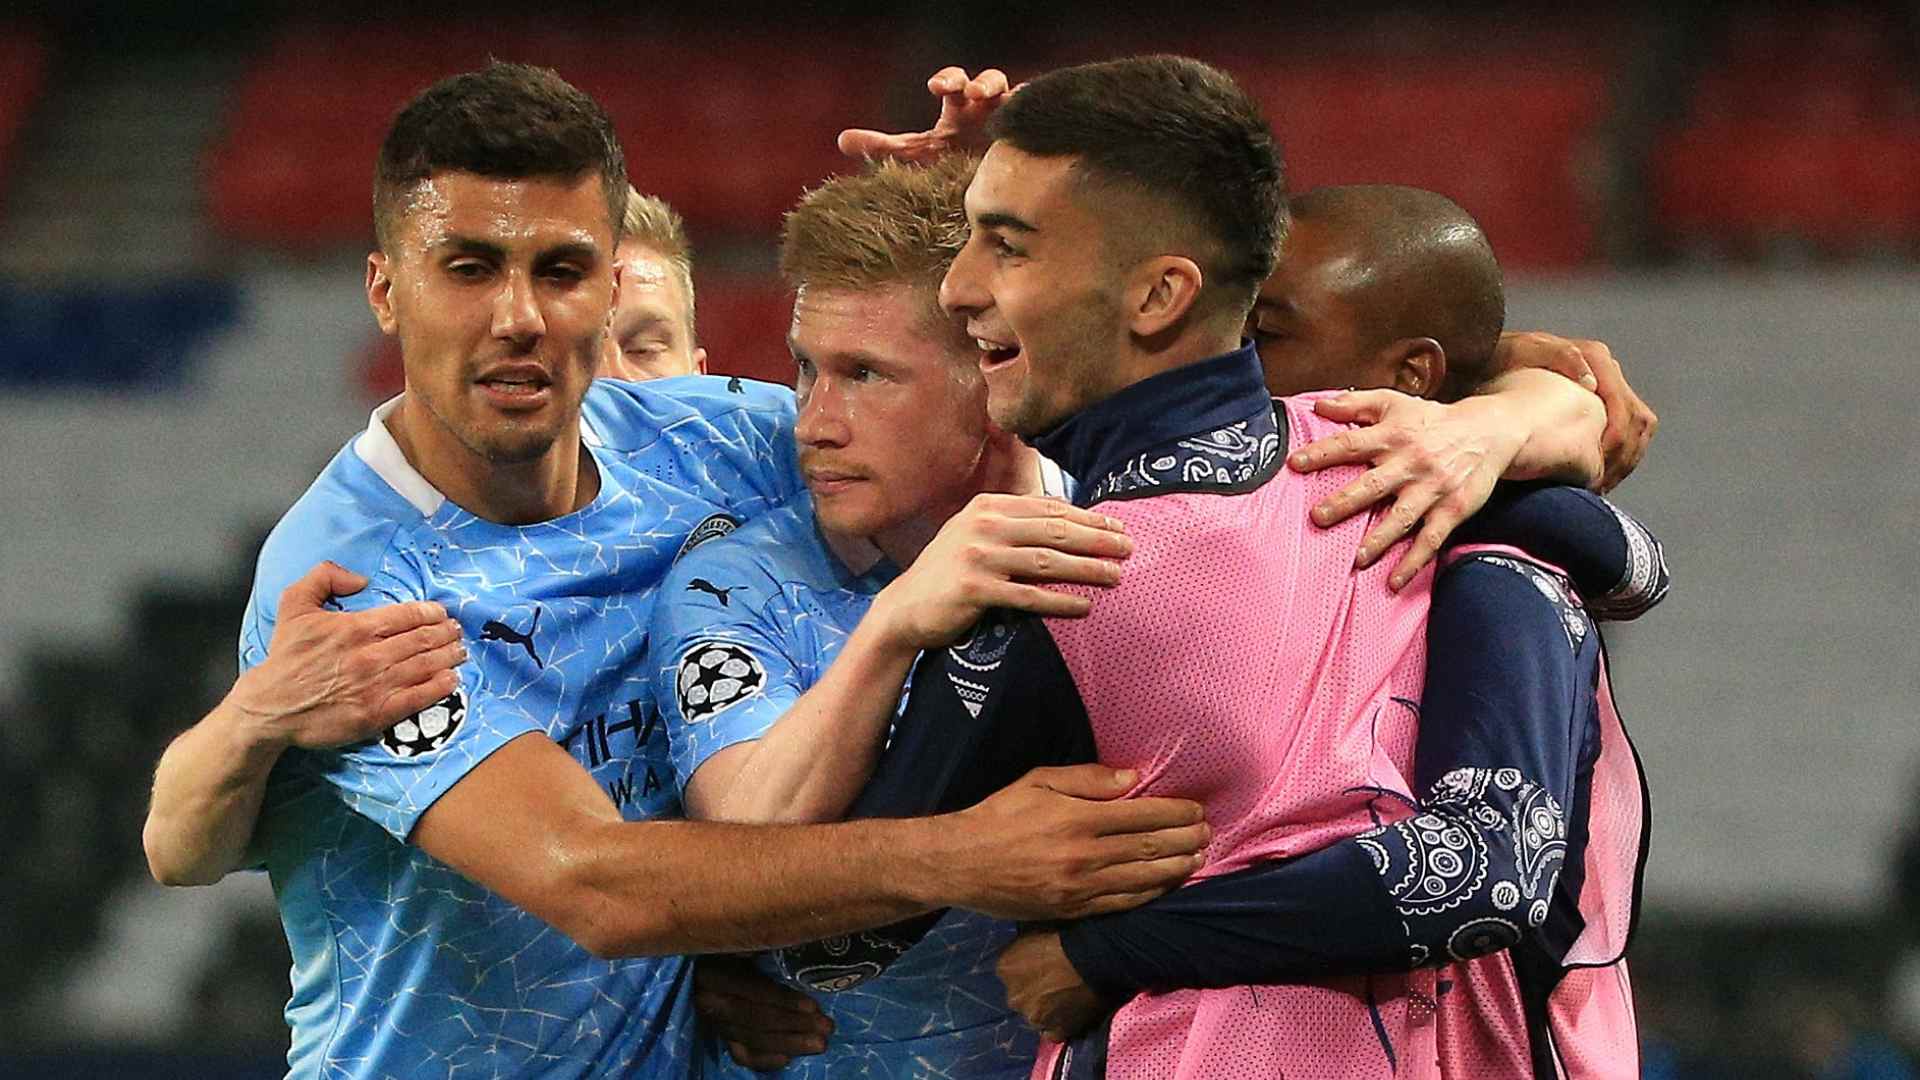 Kevin de Bruyne has scored 10 goals, including seven goals in the knockouts of the UEFA Champions League.